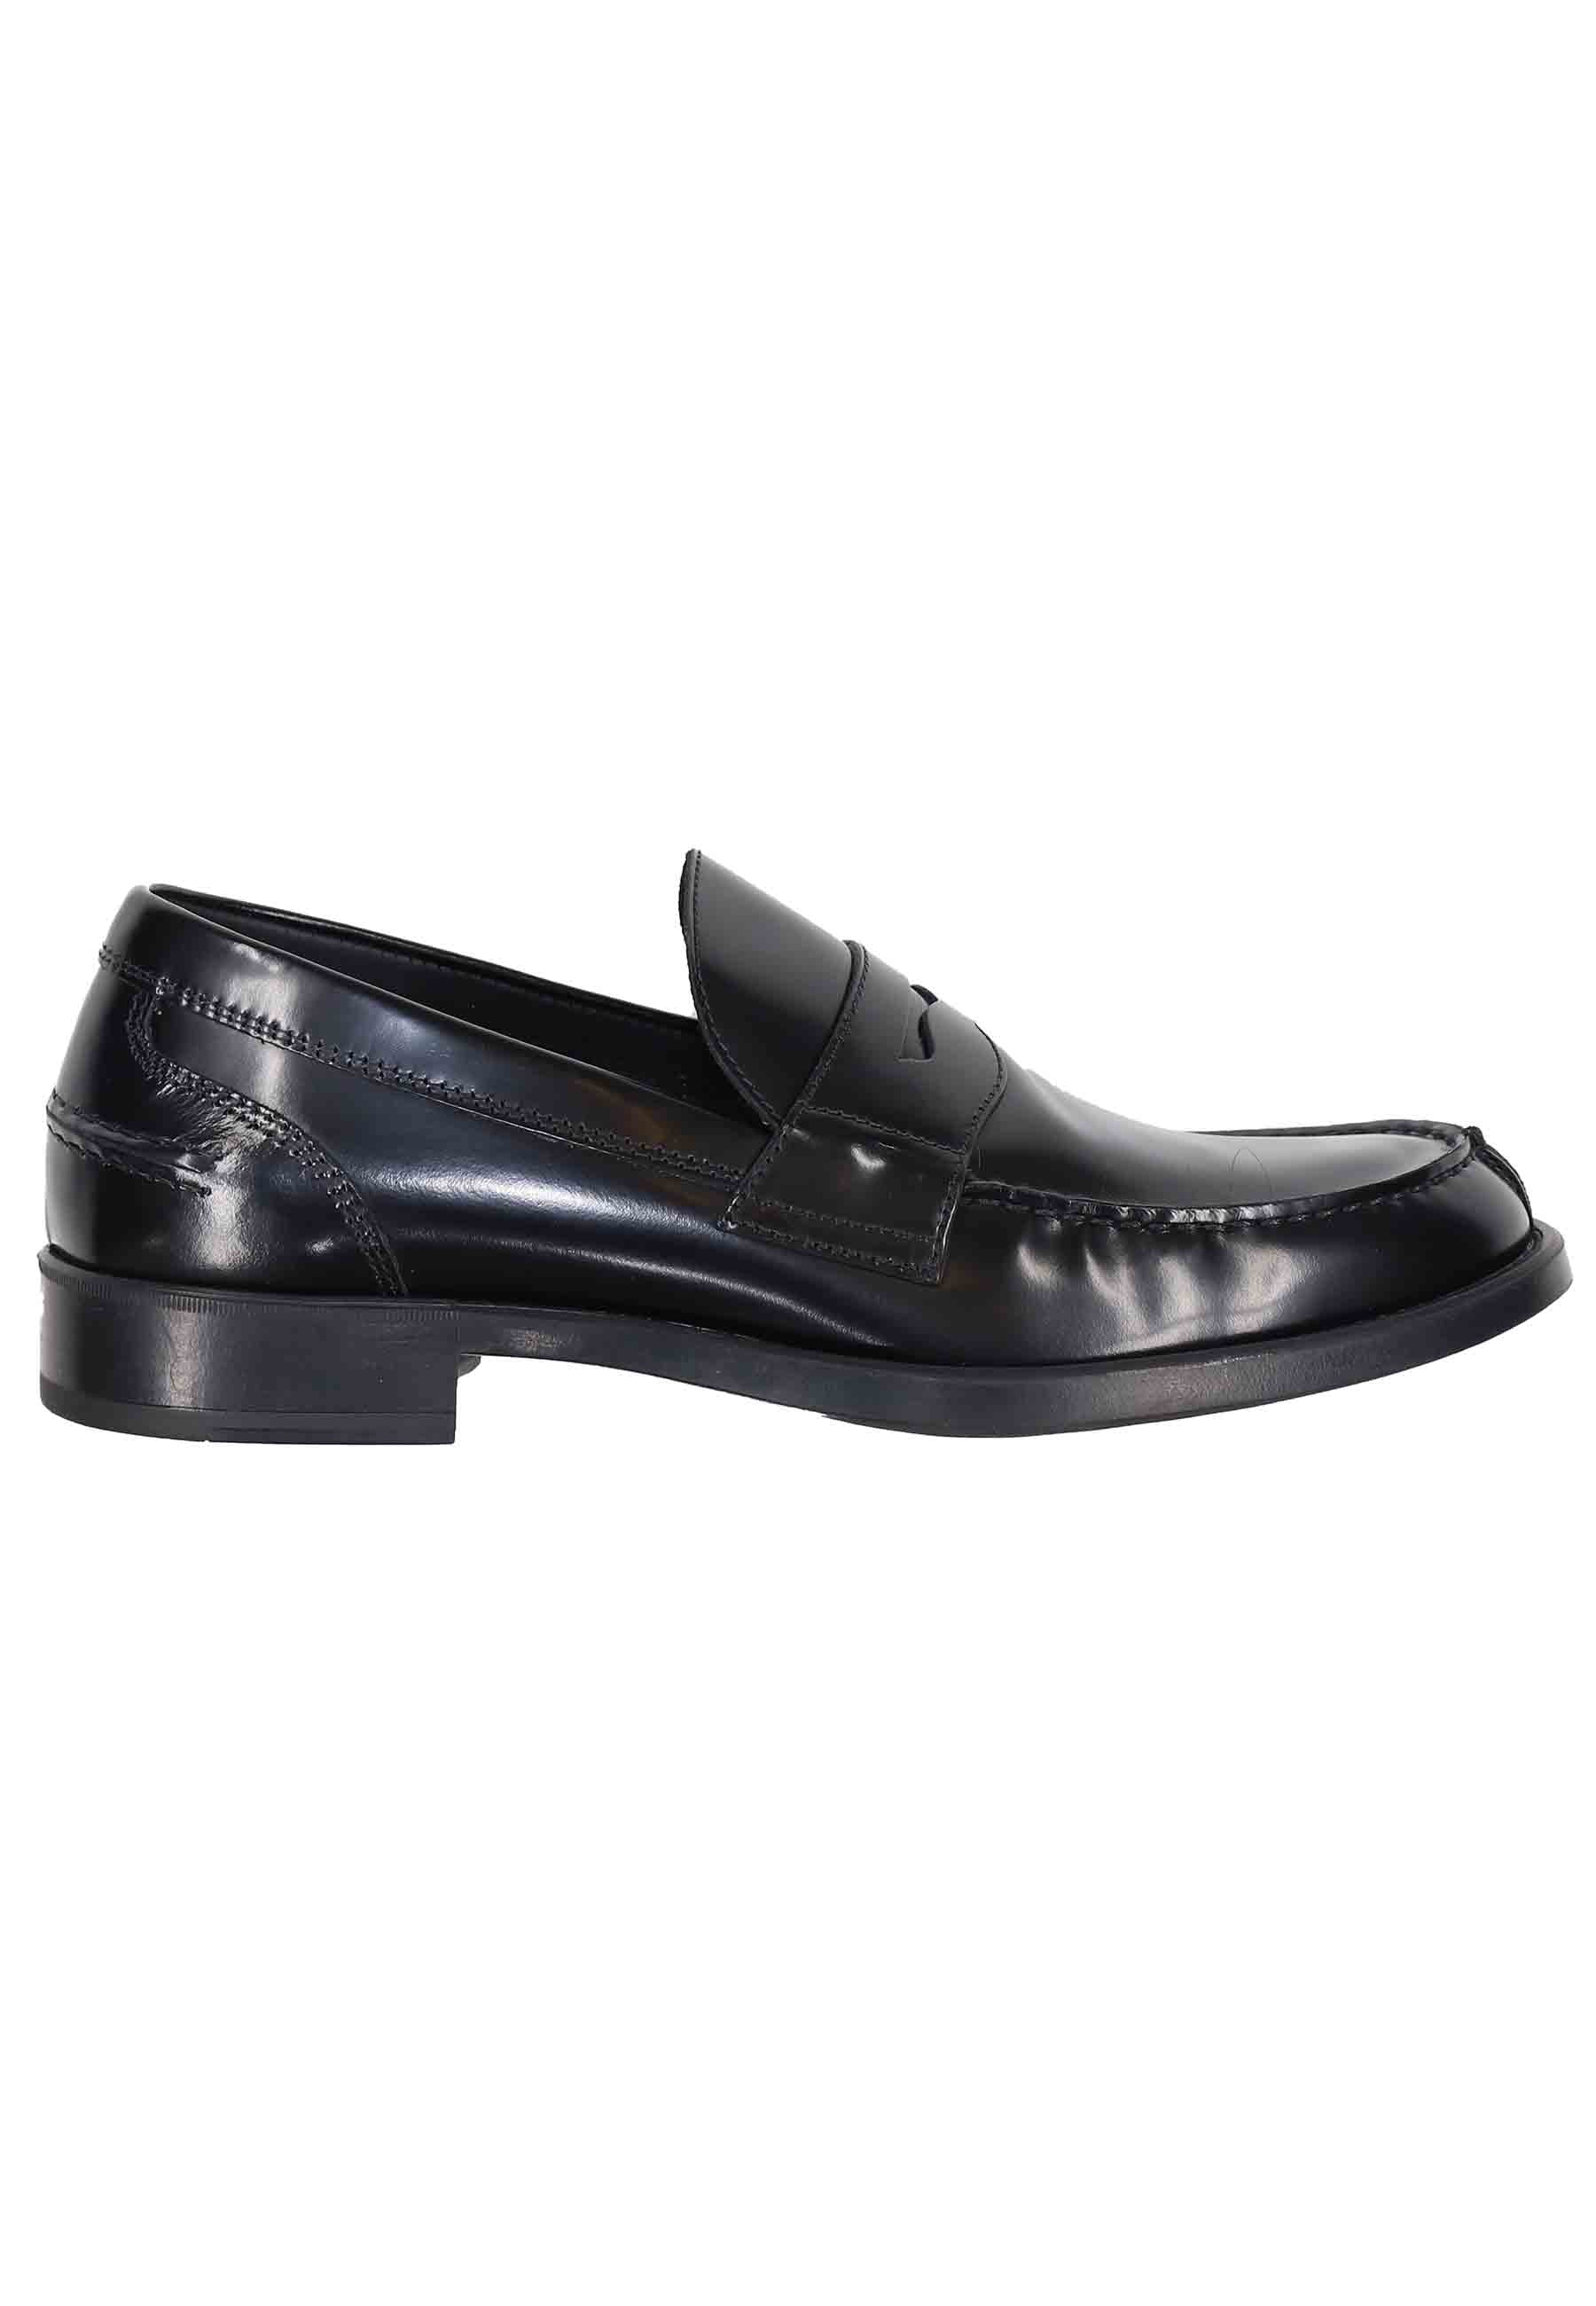 Men's loafers in black shiny leather with light rubber sole